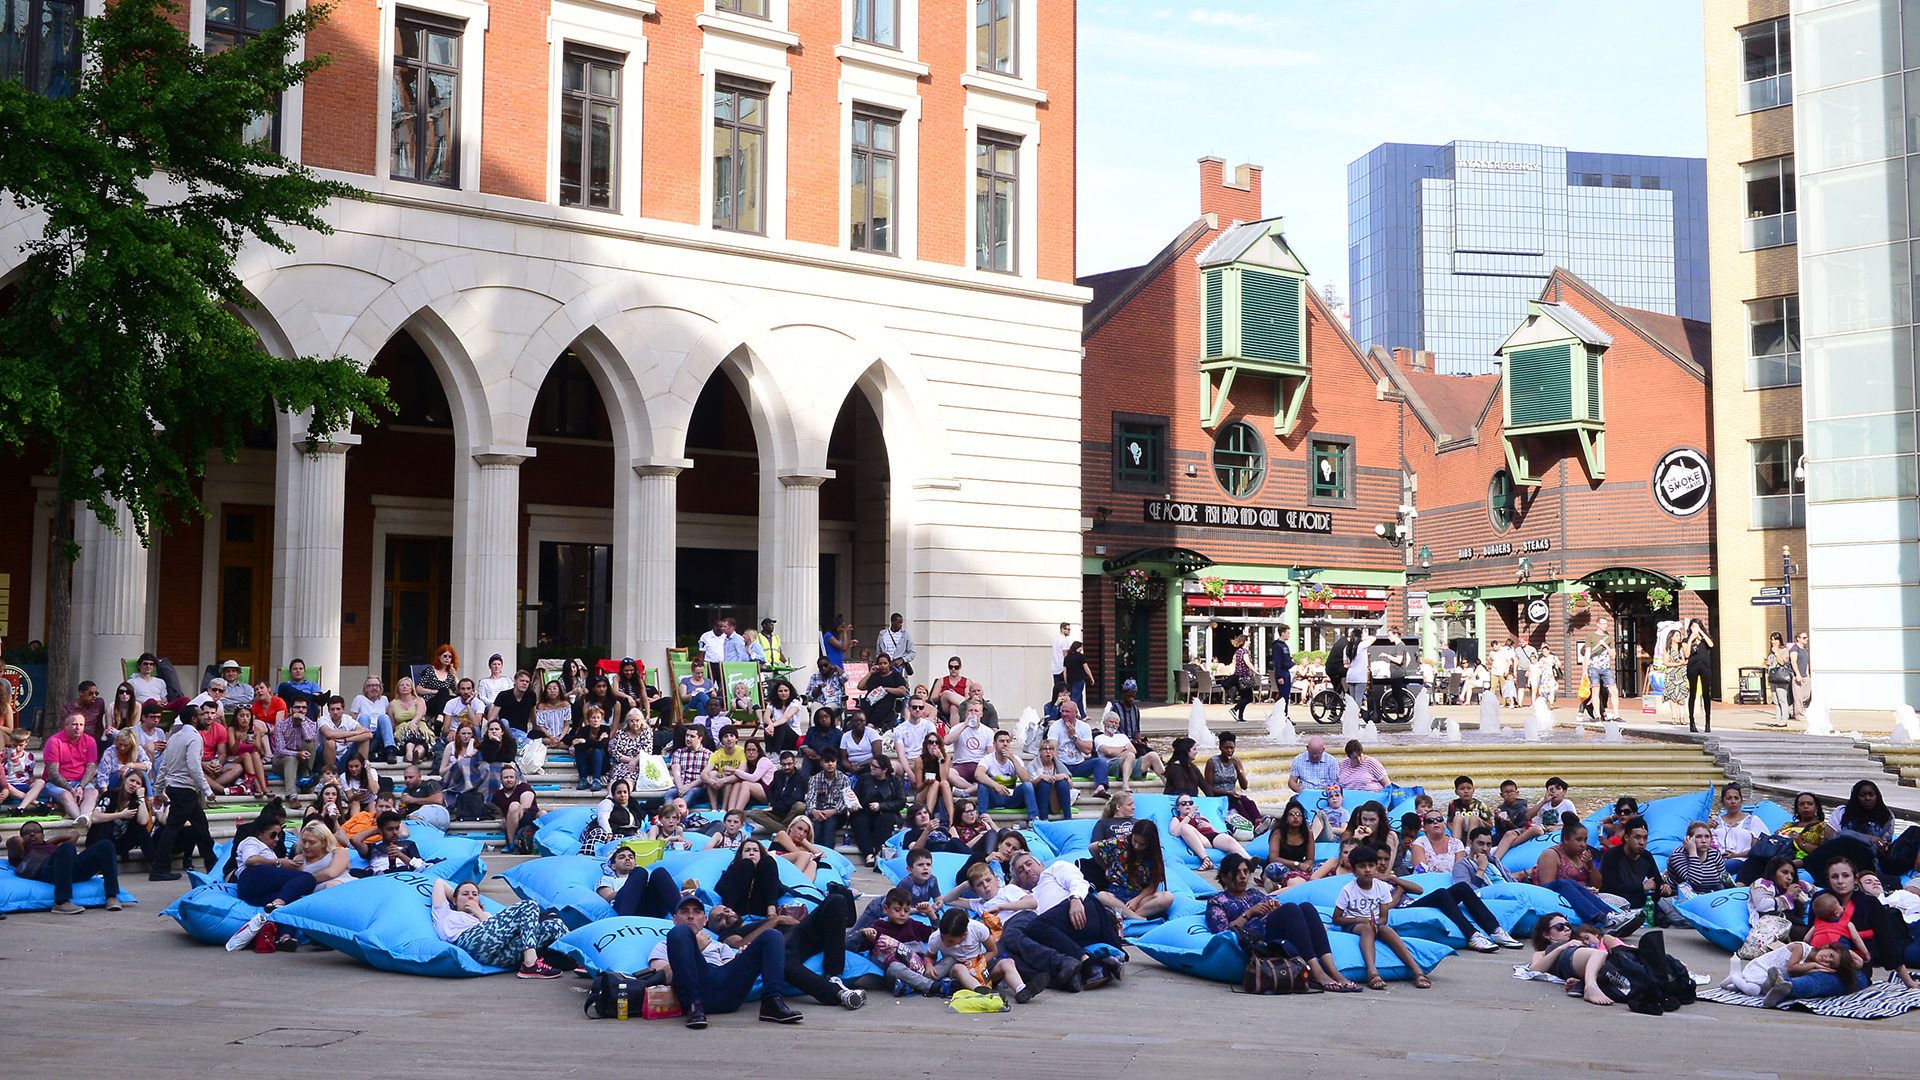 Large crowd outside in Brindleyplace, Birmingham.